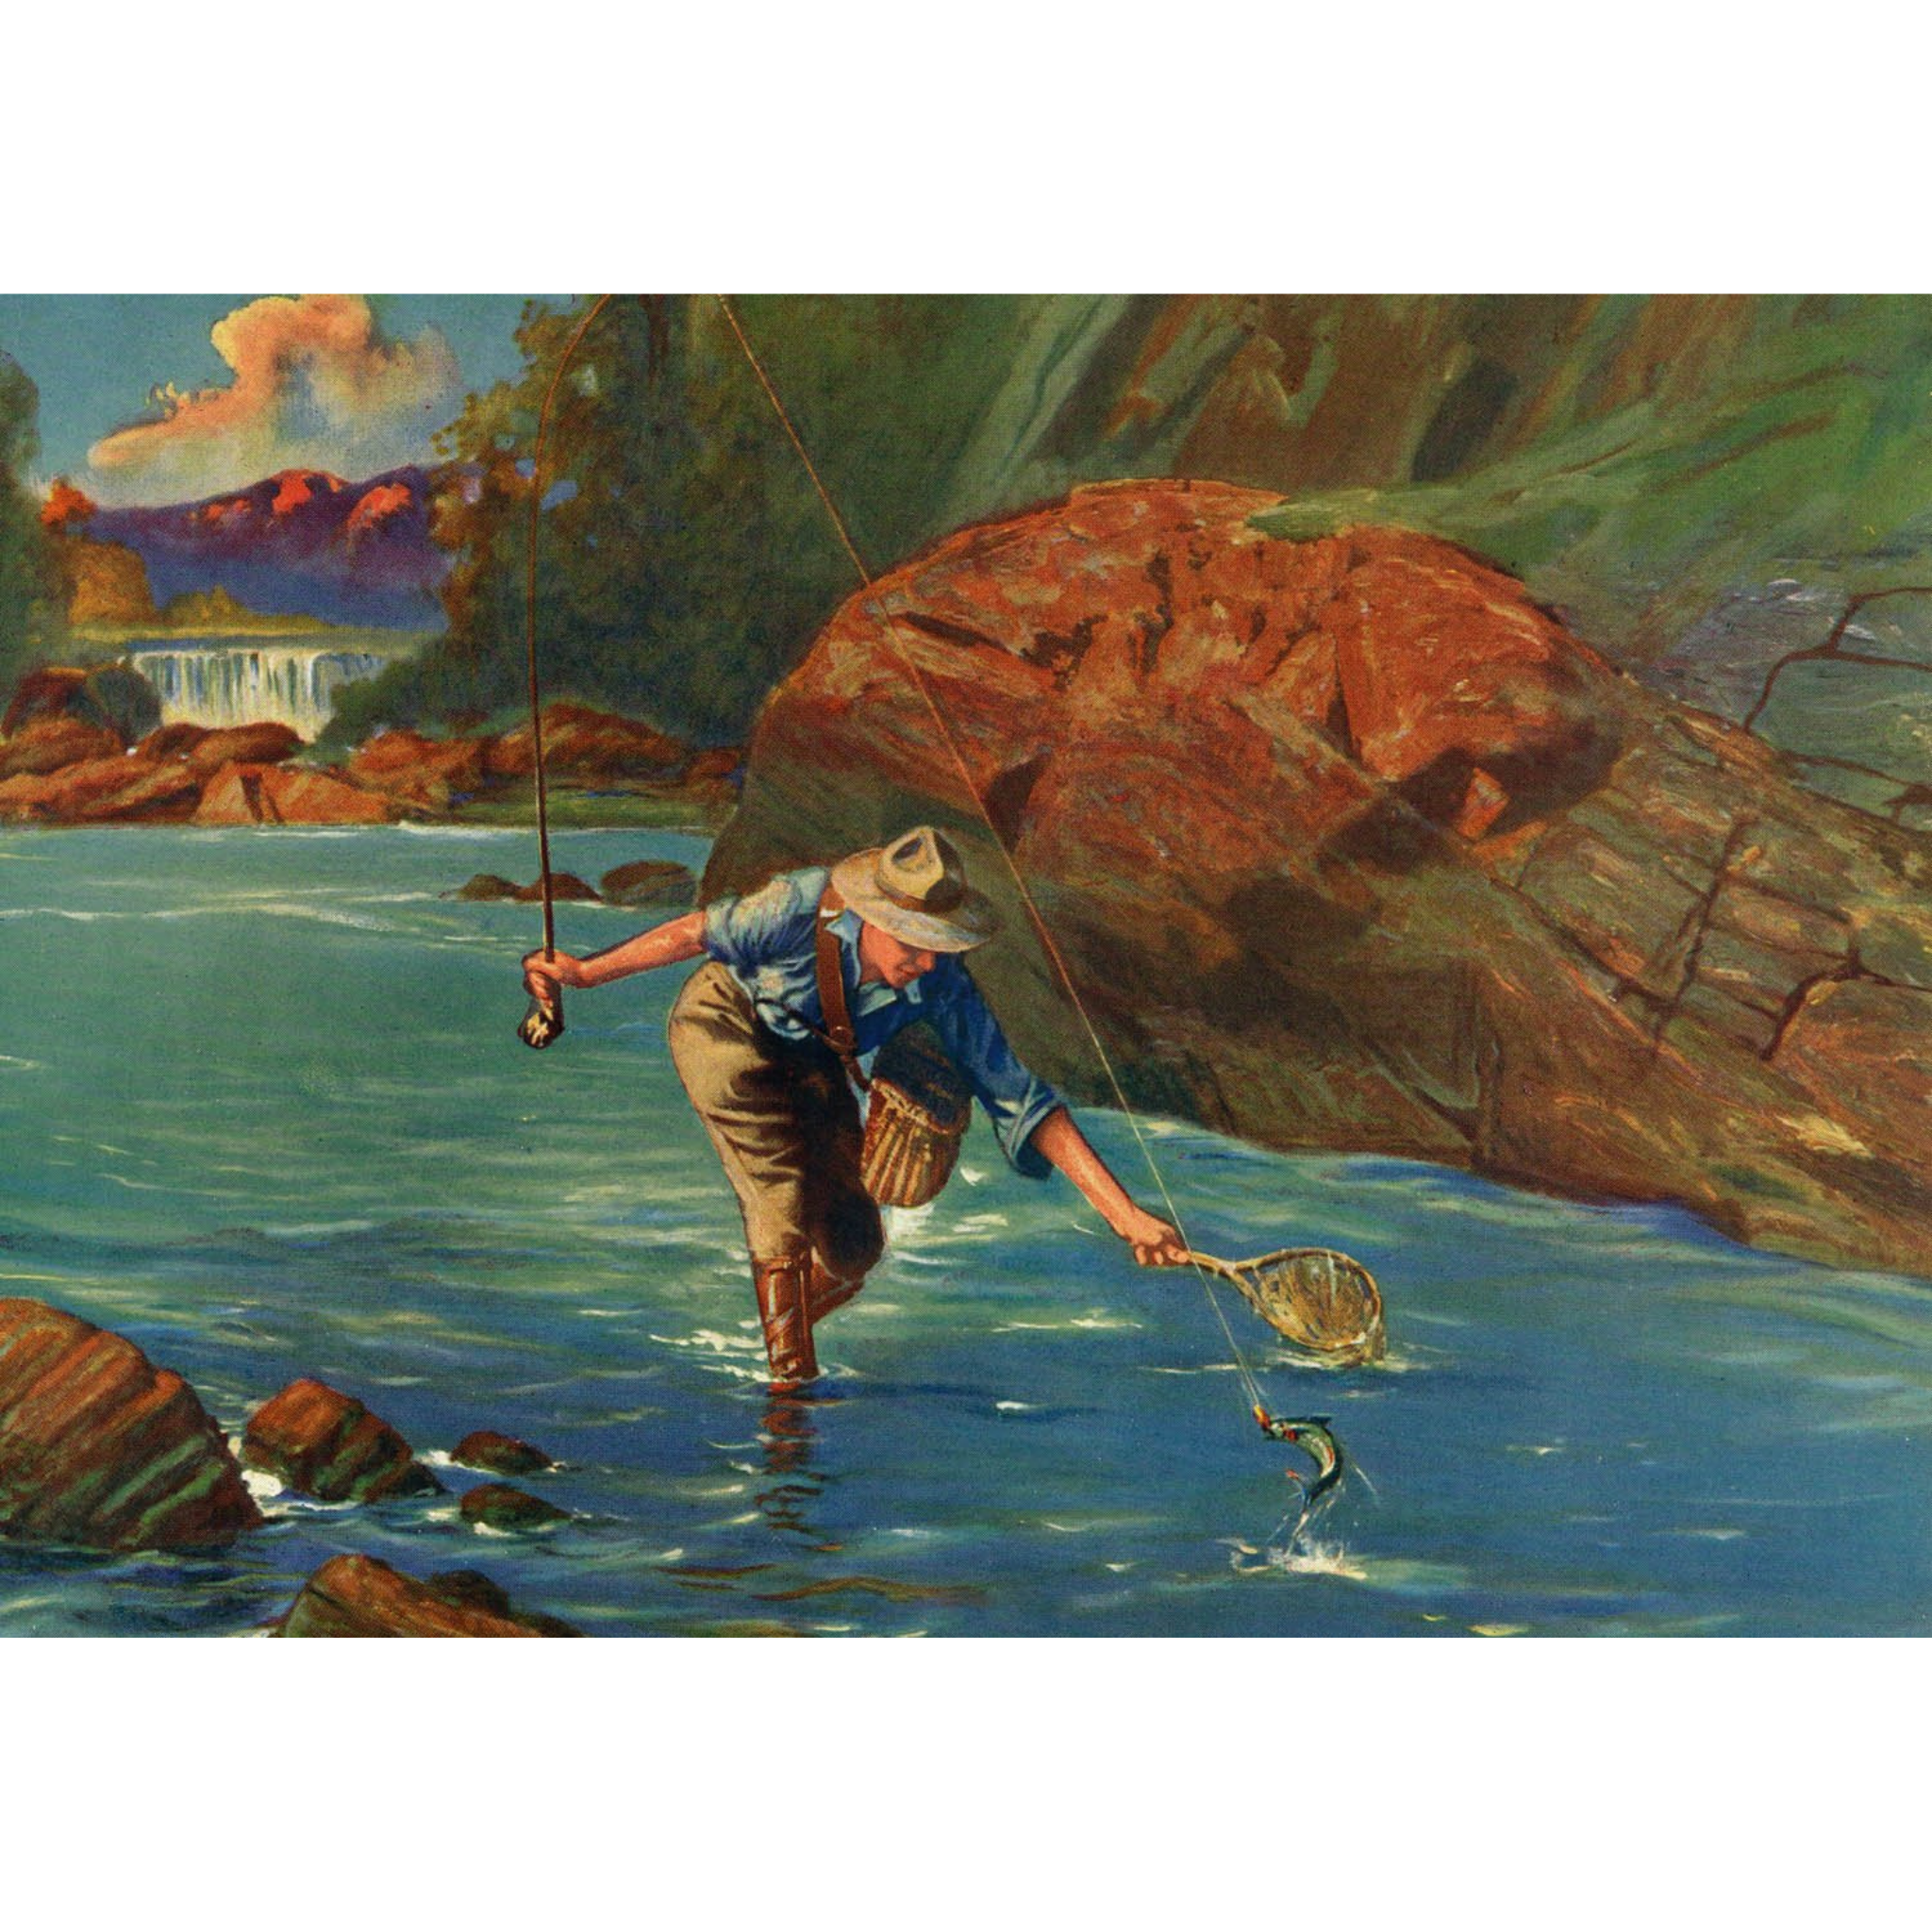 Man Netting Trout in Stream - ca. 1950 Lithograph